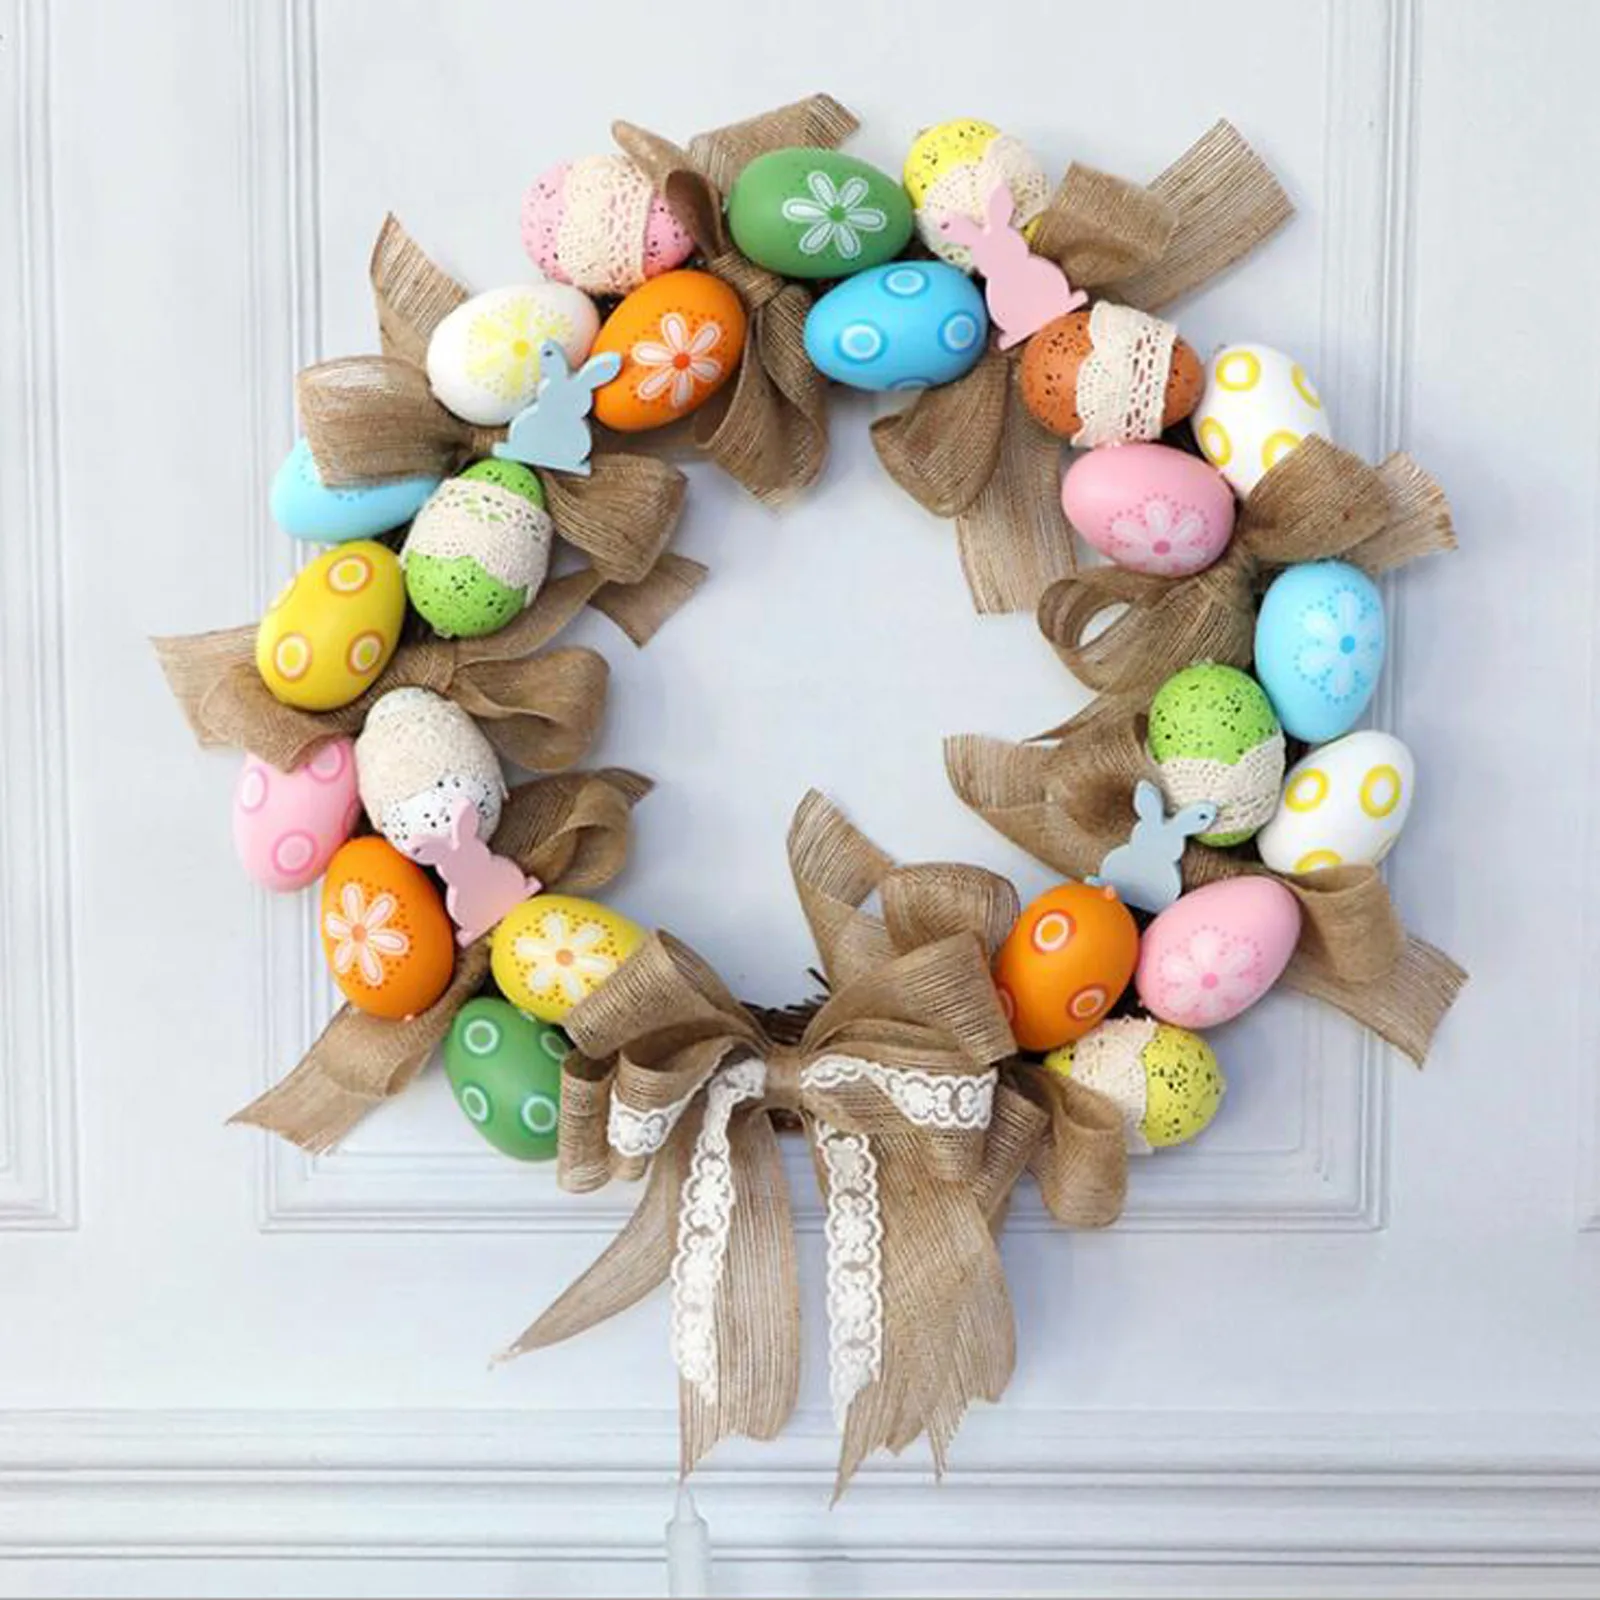 

40cm Easter Wreath with Pastel Eggs Artificial Leaves Flower Front Door Porch Welcome Sign Spring Festival Decor Party Supplies